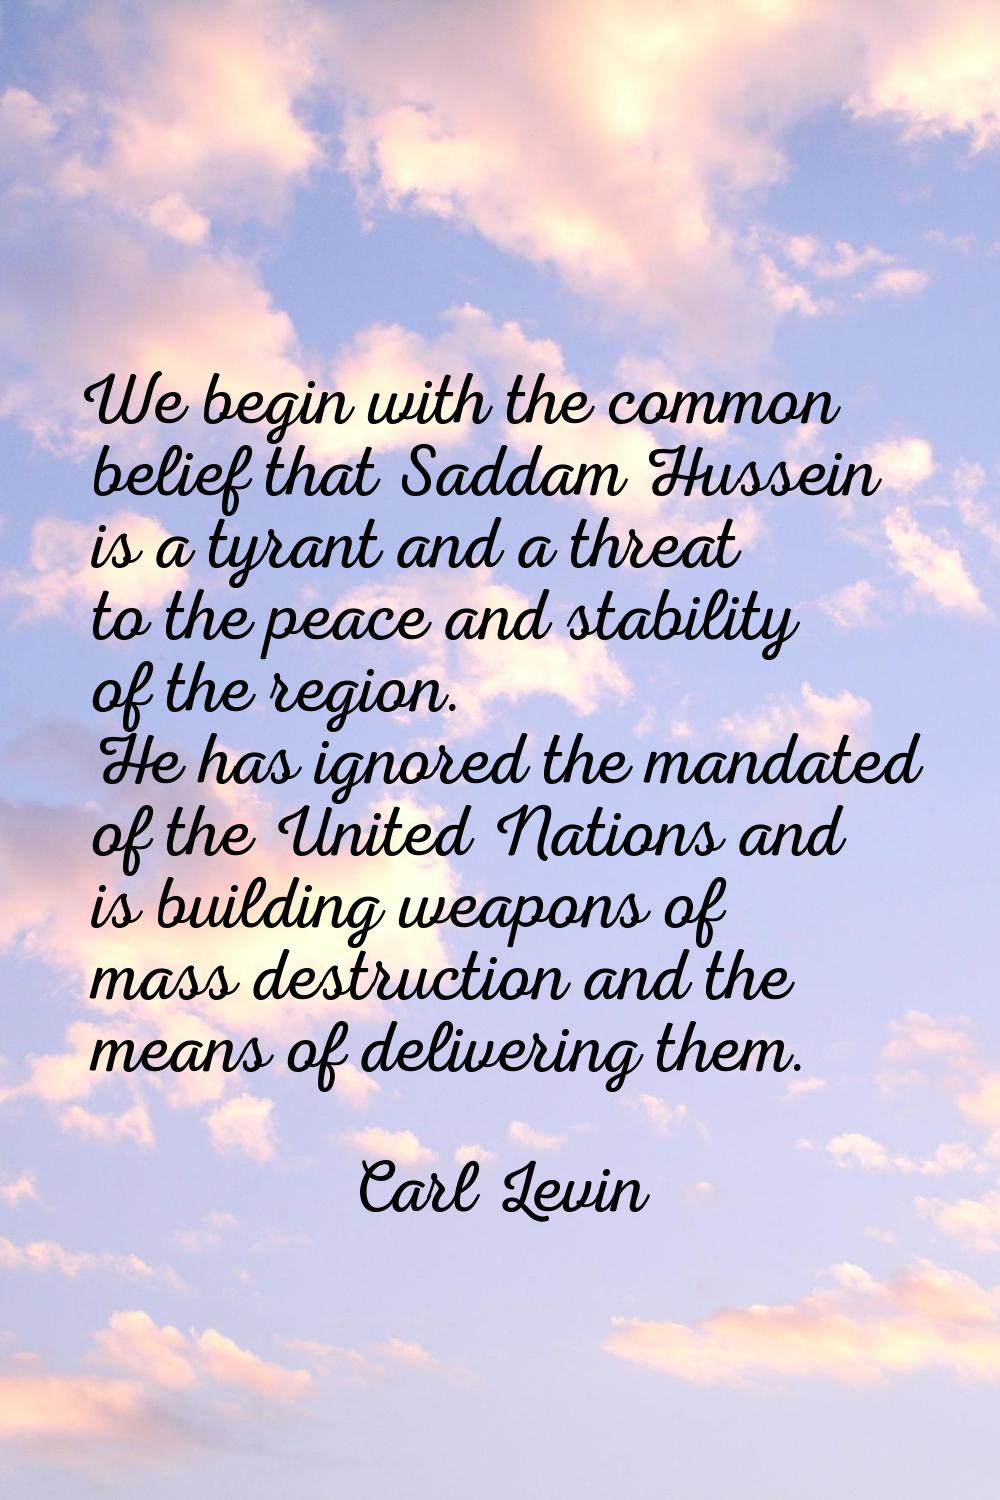 We begin with the common belief that Saddam Hussein is a tyrant and a threat to the peace and stabi